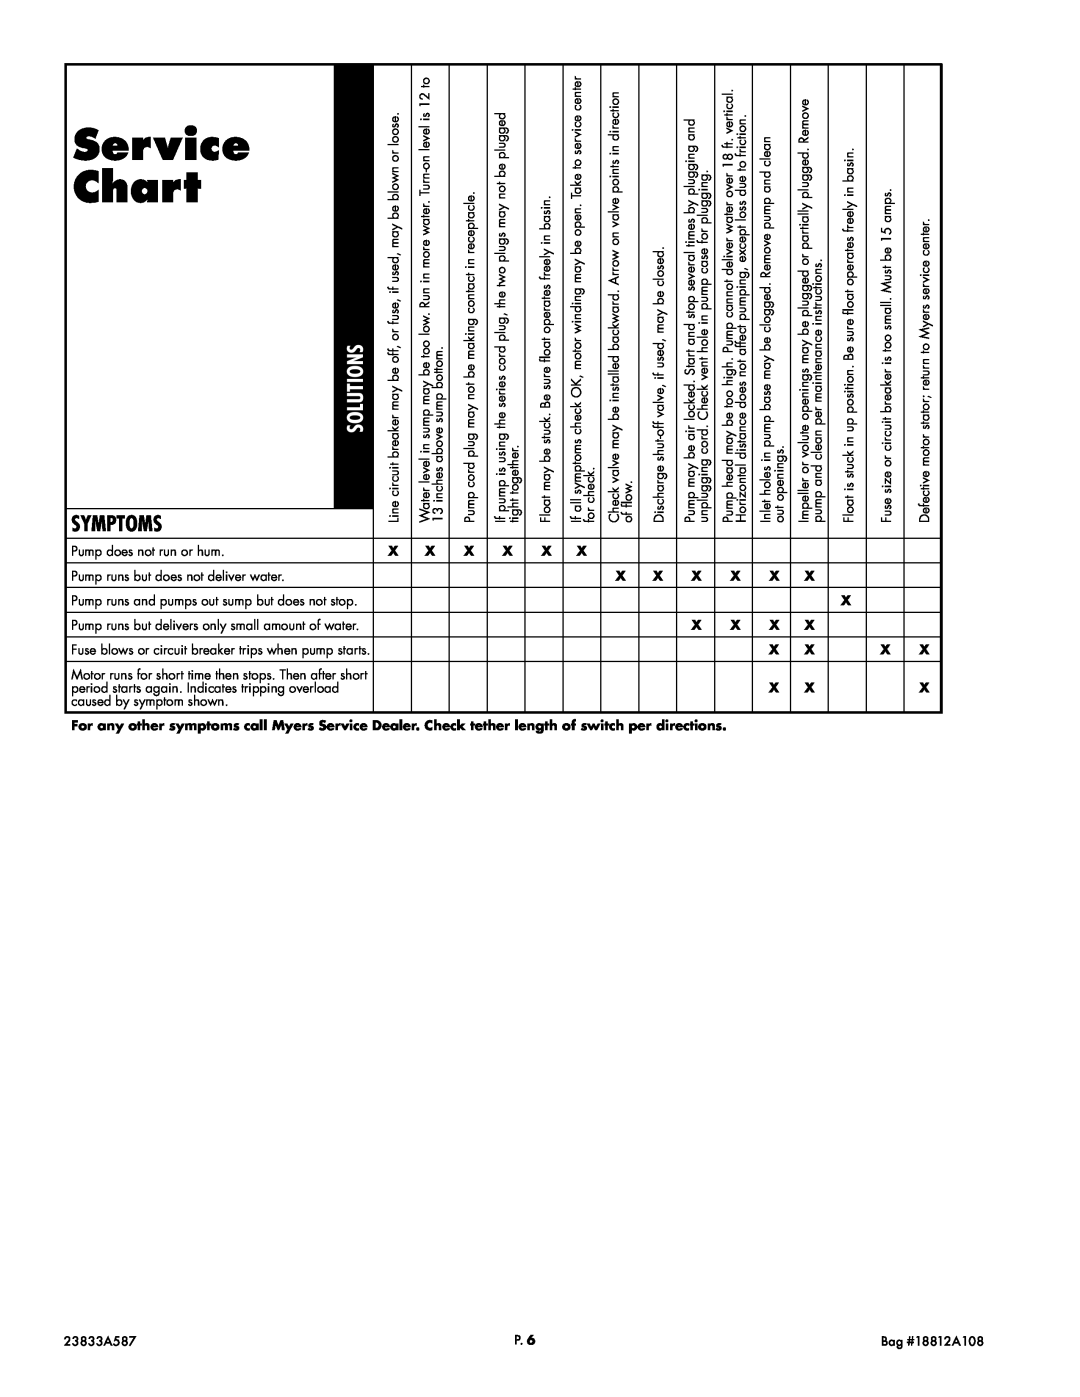 Pentair S33 service manual Service Chart, Symptoms, Solutions 